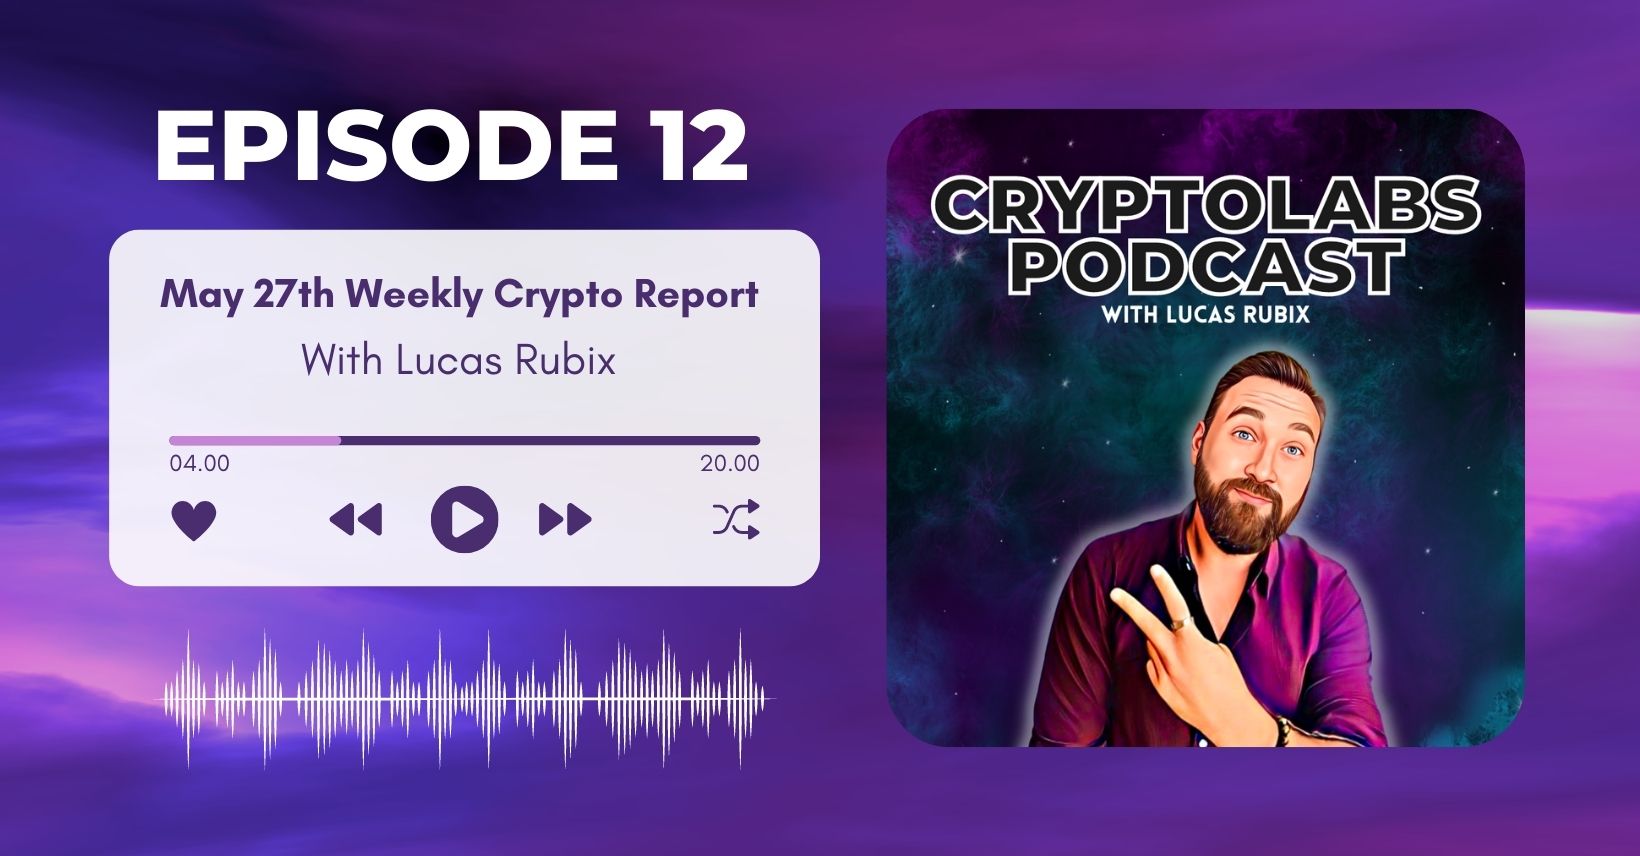 Episode 12 of the CryptoLabs Podcast Weekly Crypto Market re-Cap for Friday May 27th